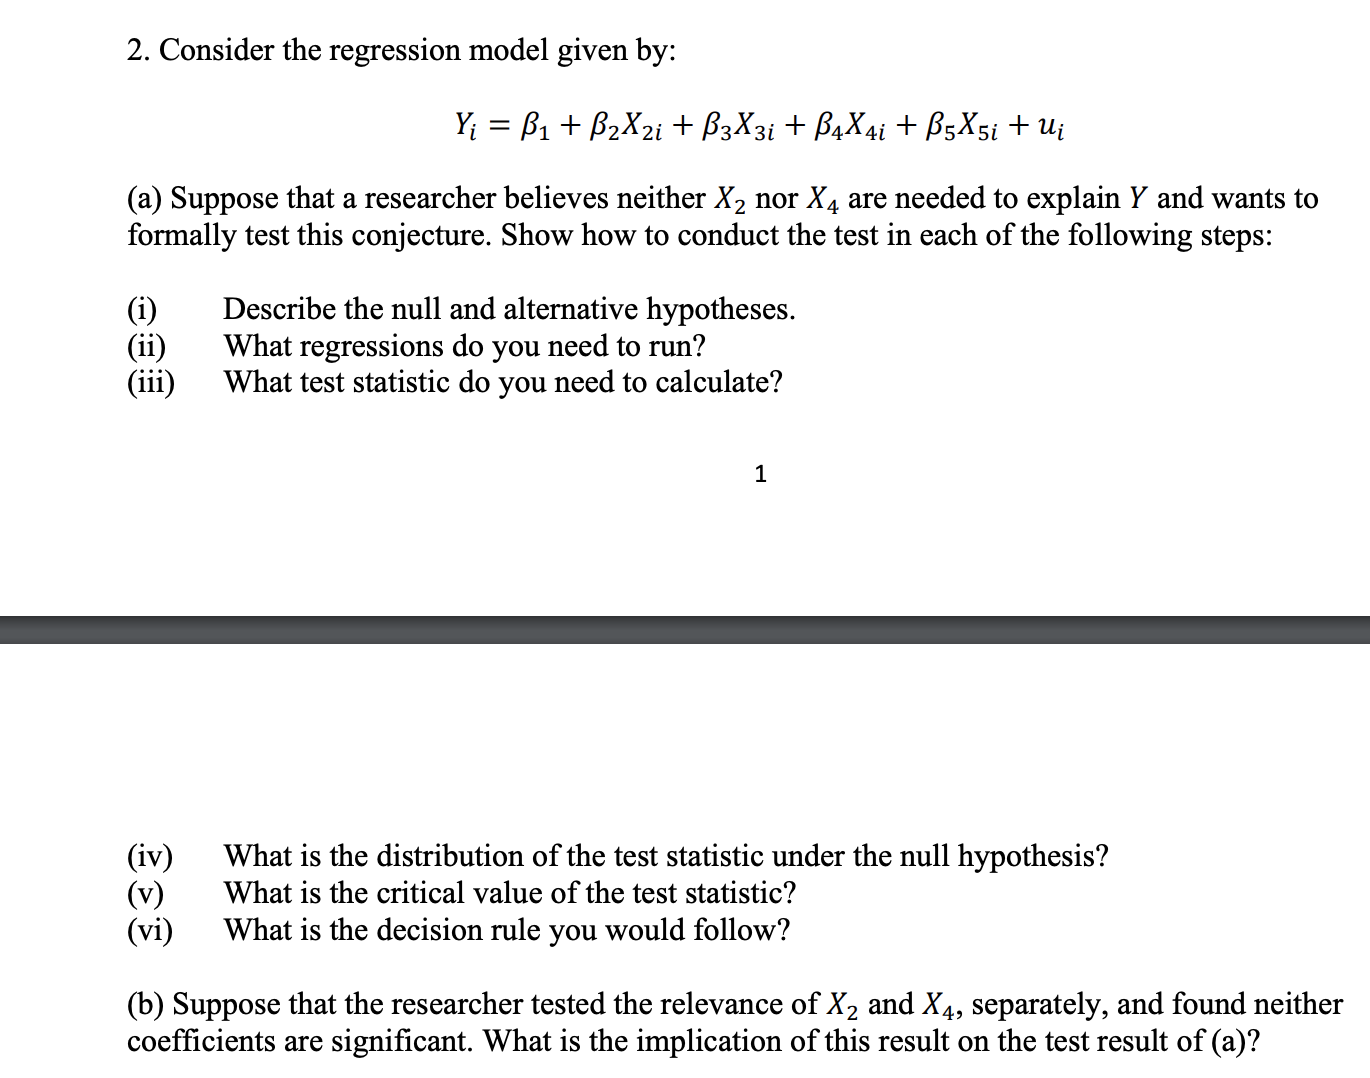 Answered 2 Consider The Regression Model Given Bartleby 9018